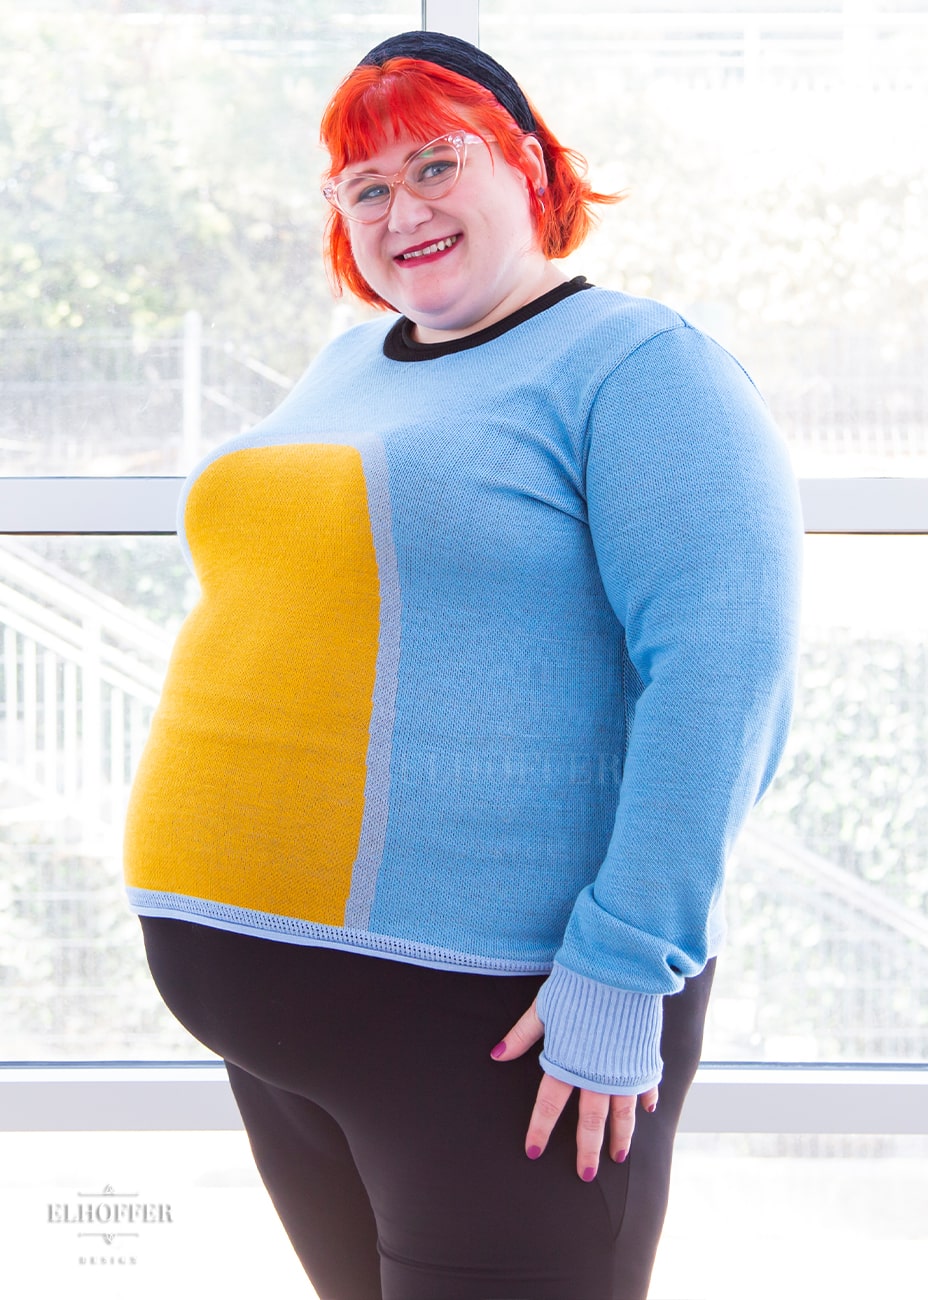 Logan, a fair skinned size 3XL model with short bright orange hair with bangs, is wearing a fitted long sleeve knit sweater with wide crew neck and rolled edges and thumbholes in the sleeve. It is a medium blue with light blue cuffs and detail around the yellow oval in the middle of the sweater. It also has a black neck and black spot in the middle of the back.